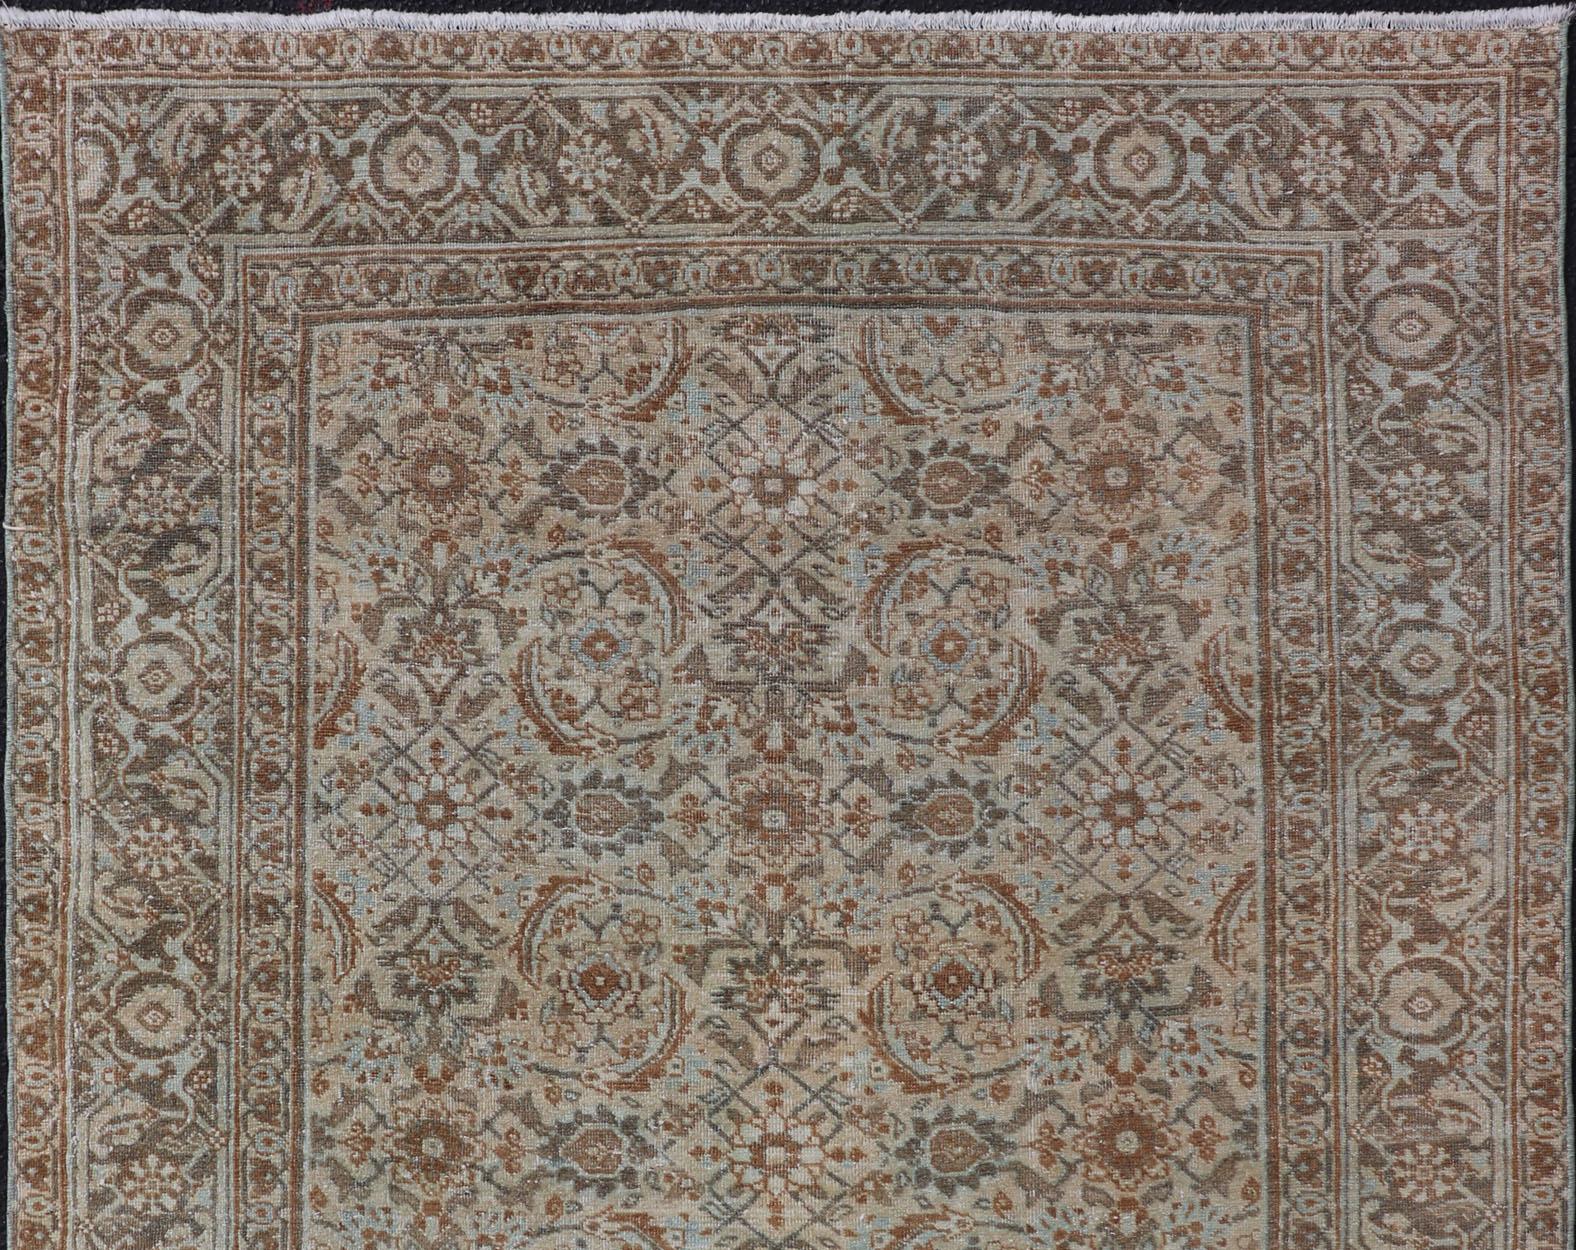 Antique Persian Tabriz Rug in Wool with All-Over Floral Design in Earth Colors For Sale 4